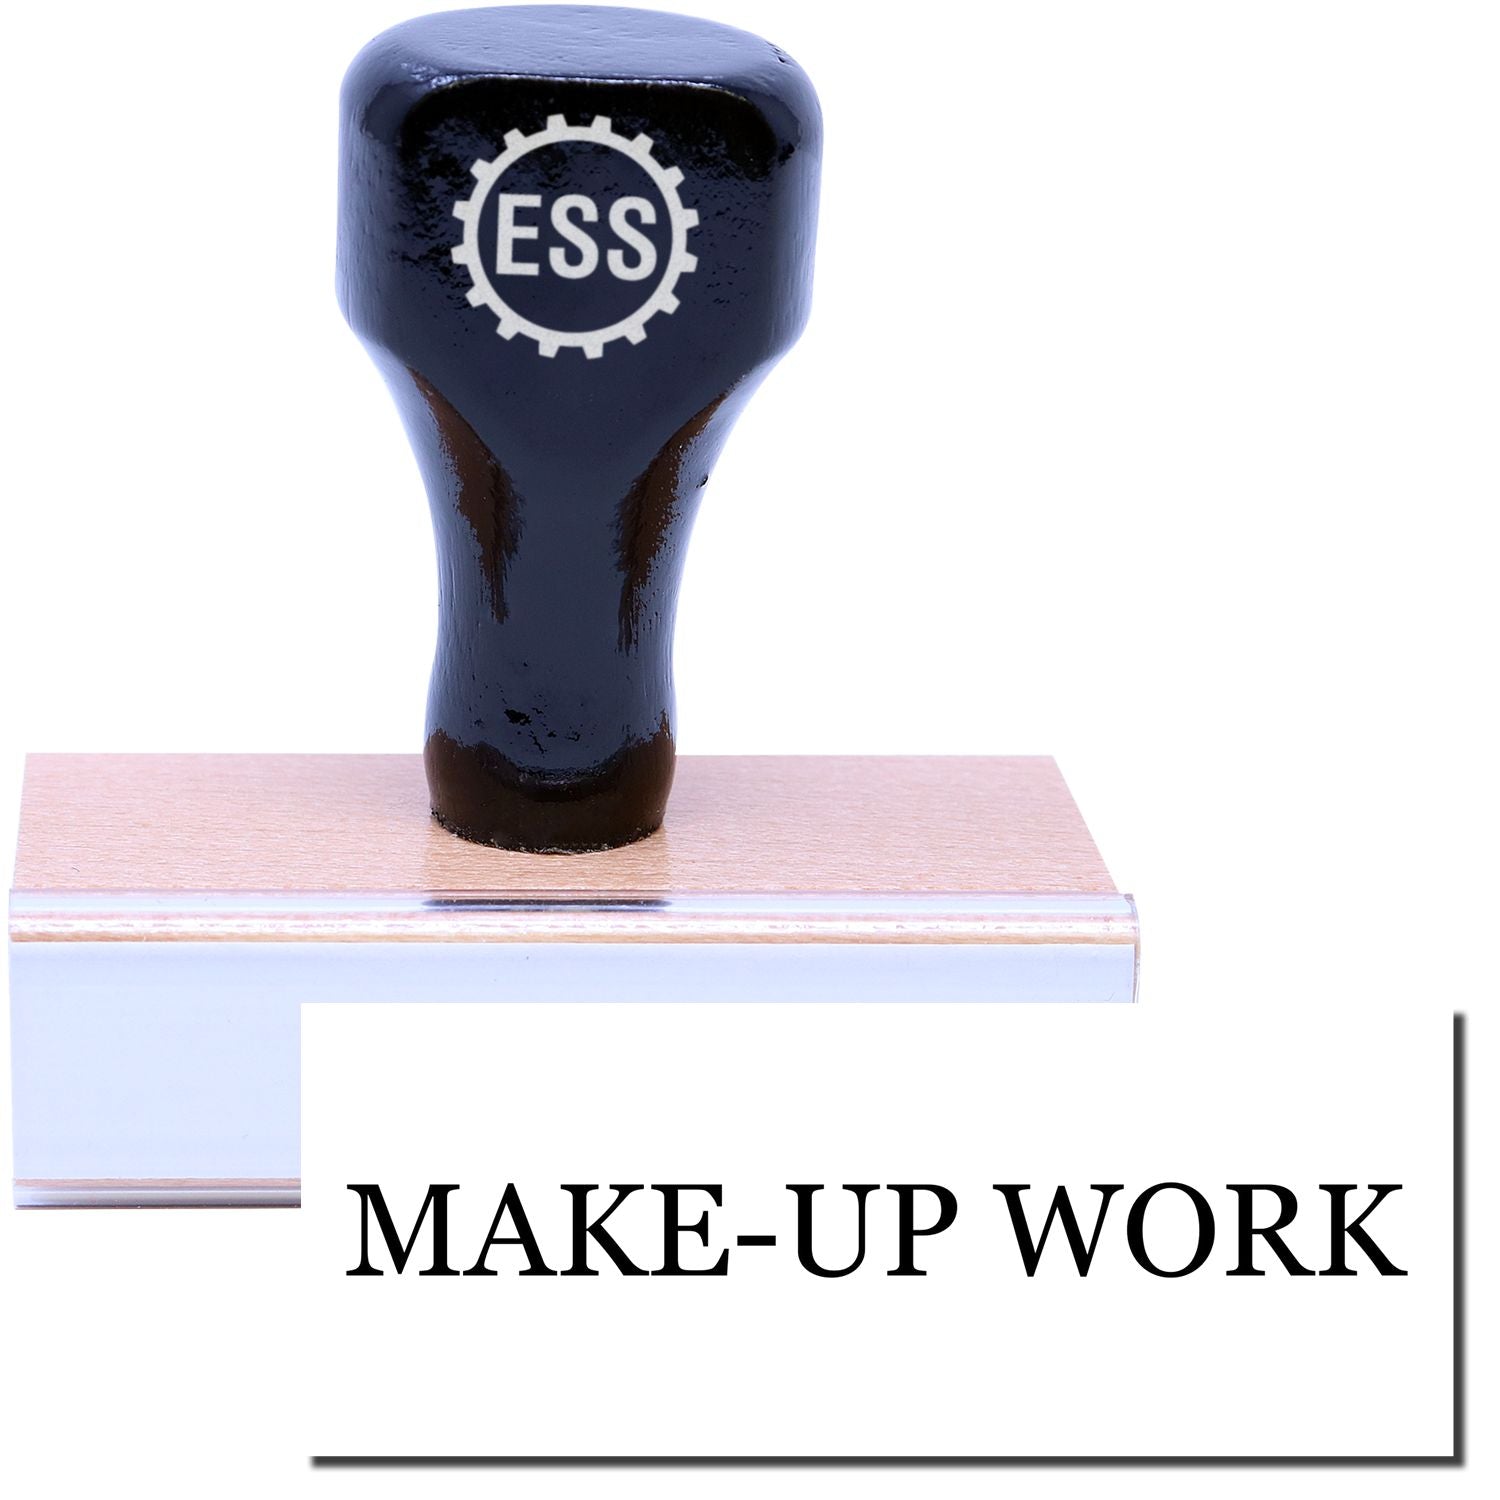 A stock office rubber stamp with a stamped image showing how the text "MAKE-UP WORK" is displayed after stamping.